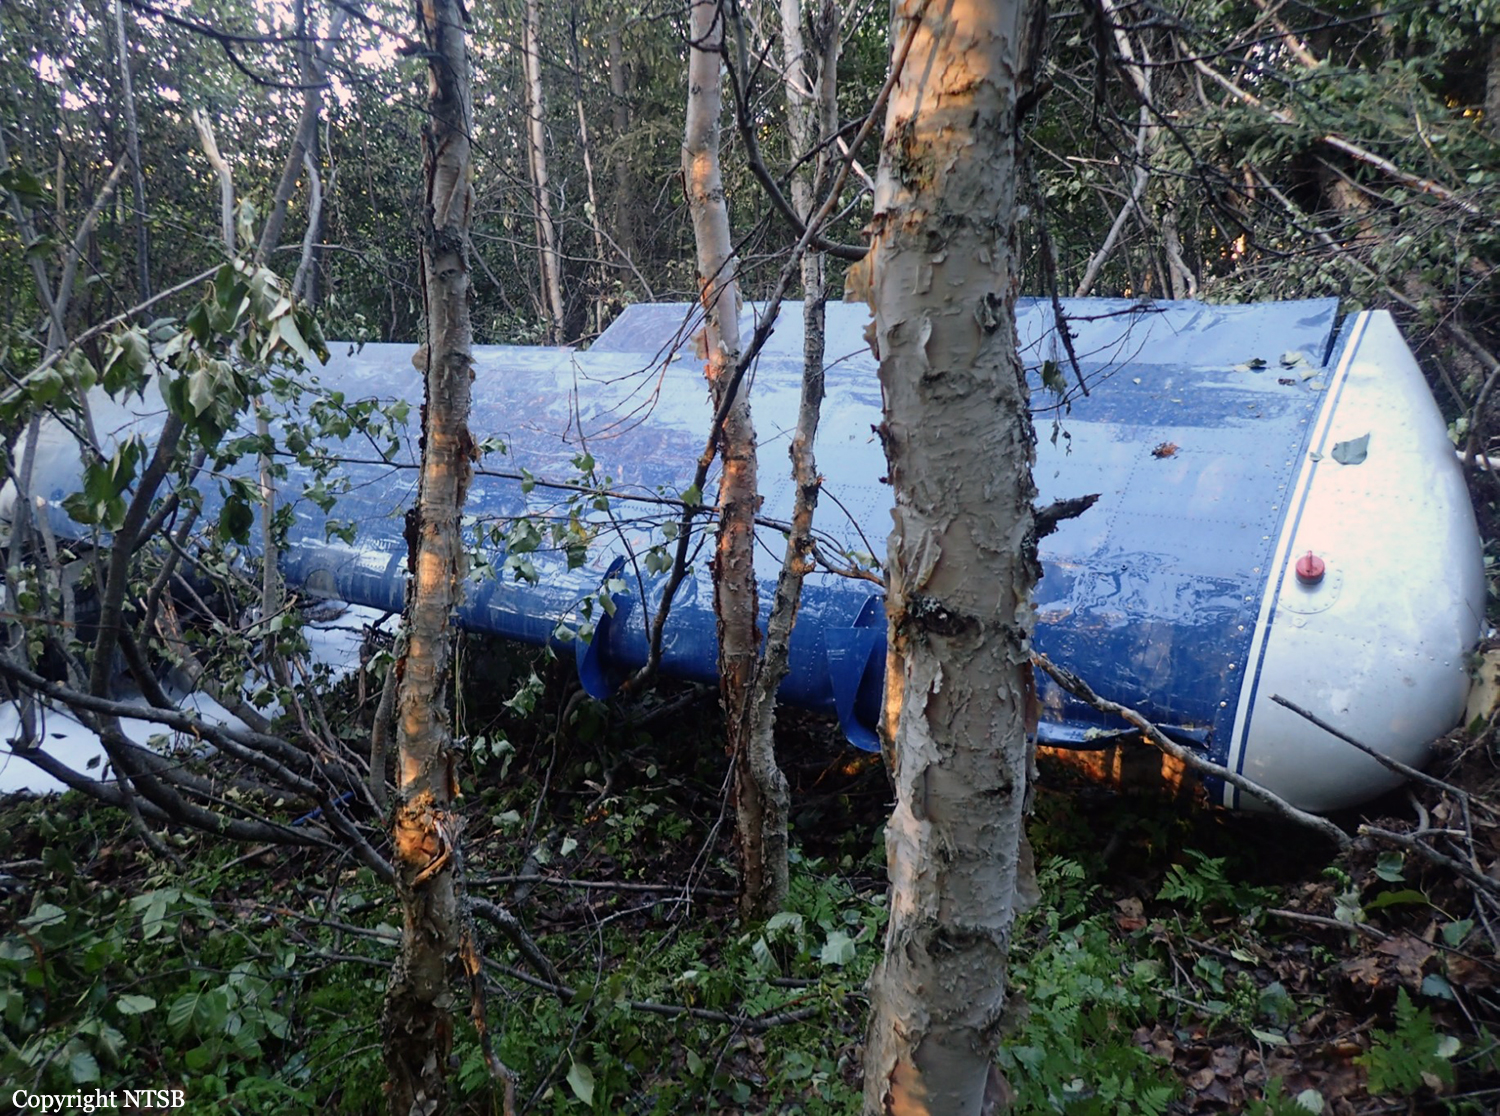 Abandoned Passenger Plane Wreck in the Forest in Winter, Vehicles